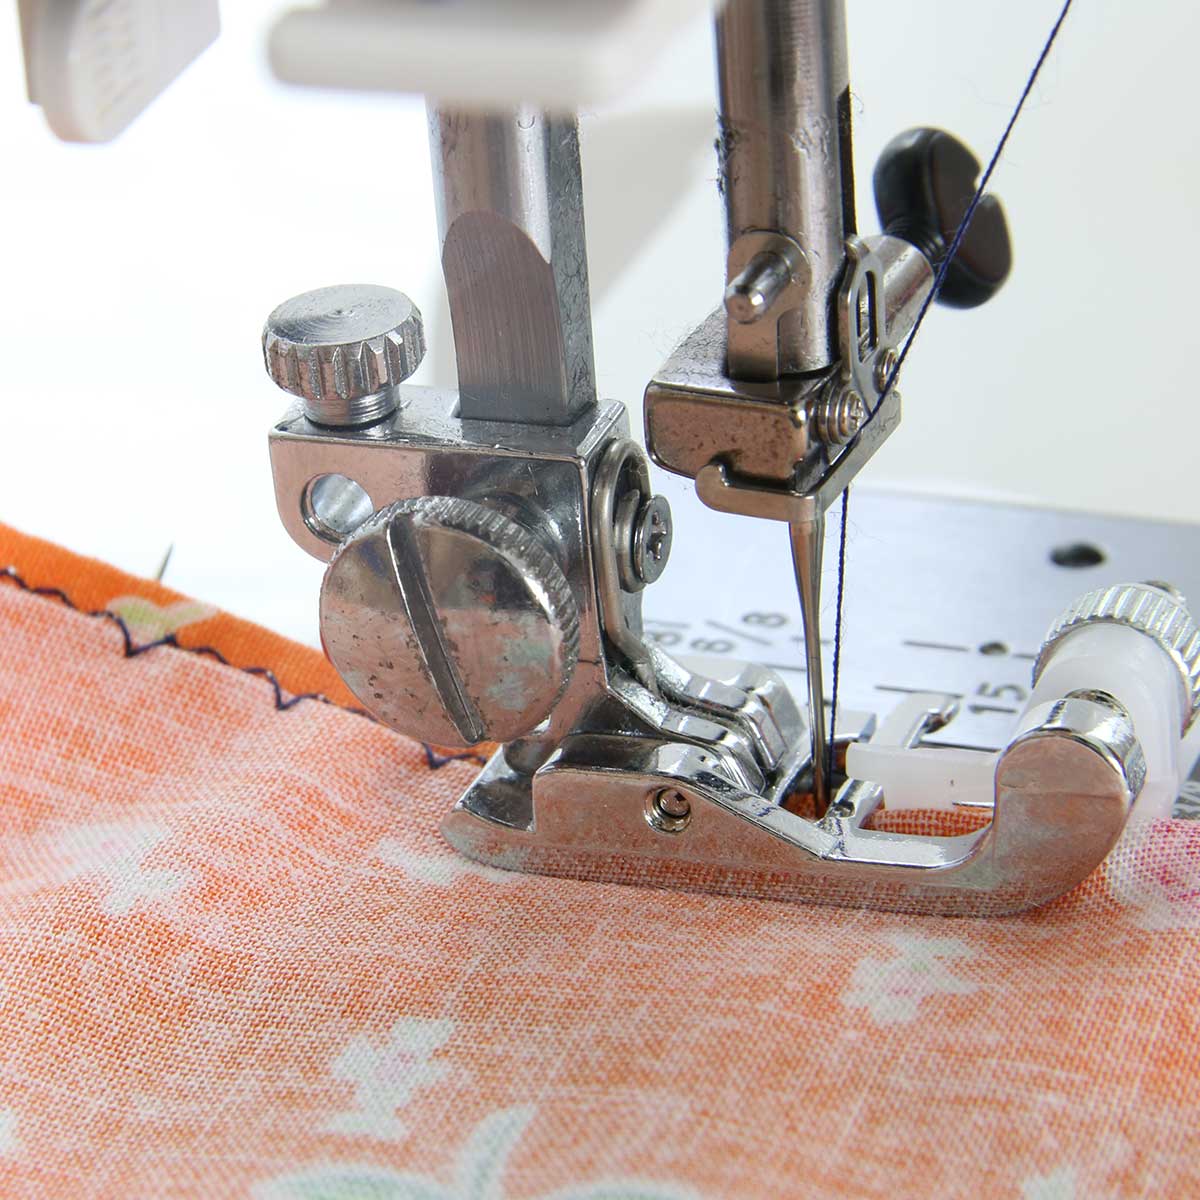 Advantages And Disadvantages Of Blind Stitching